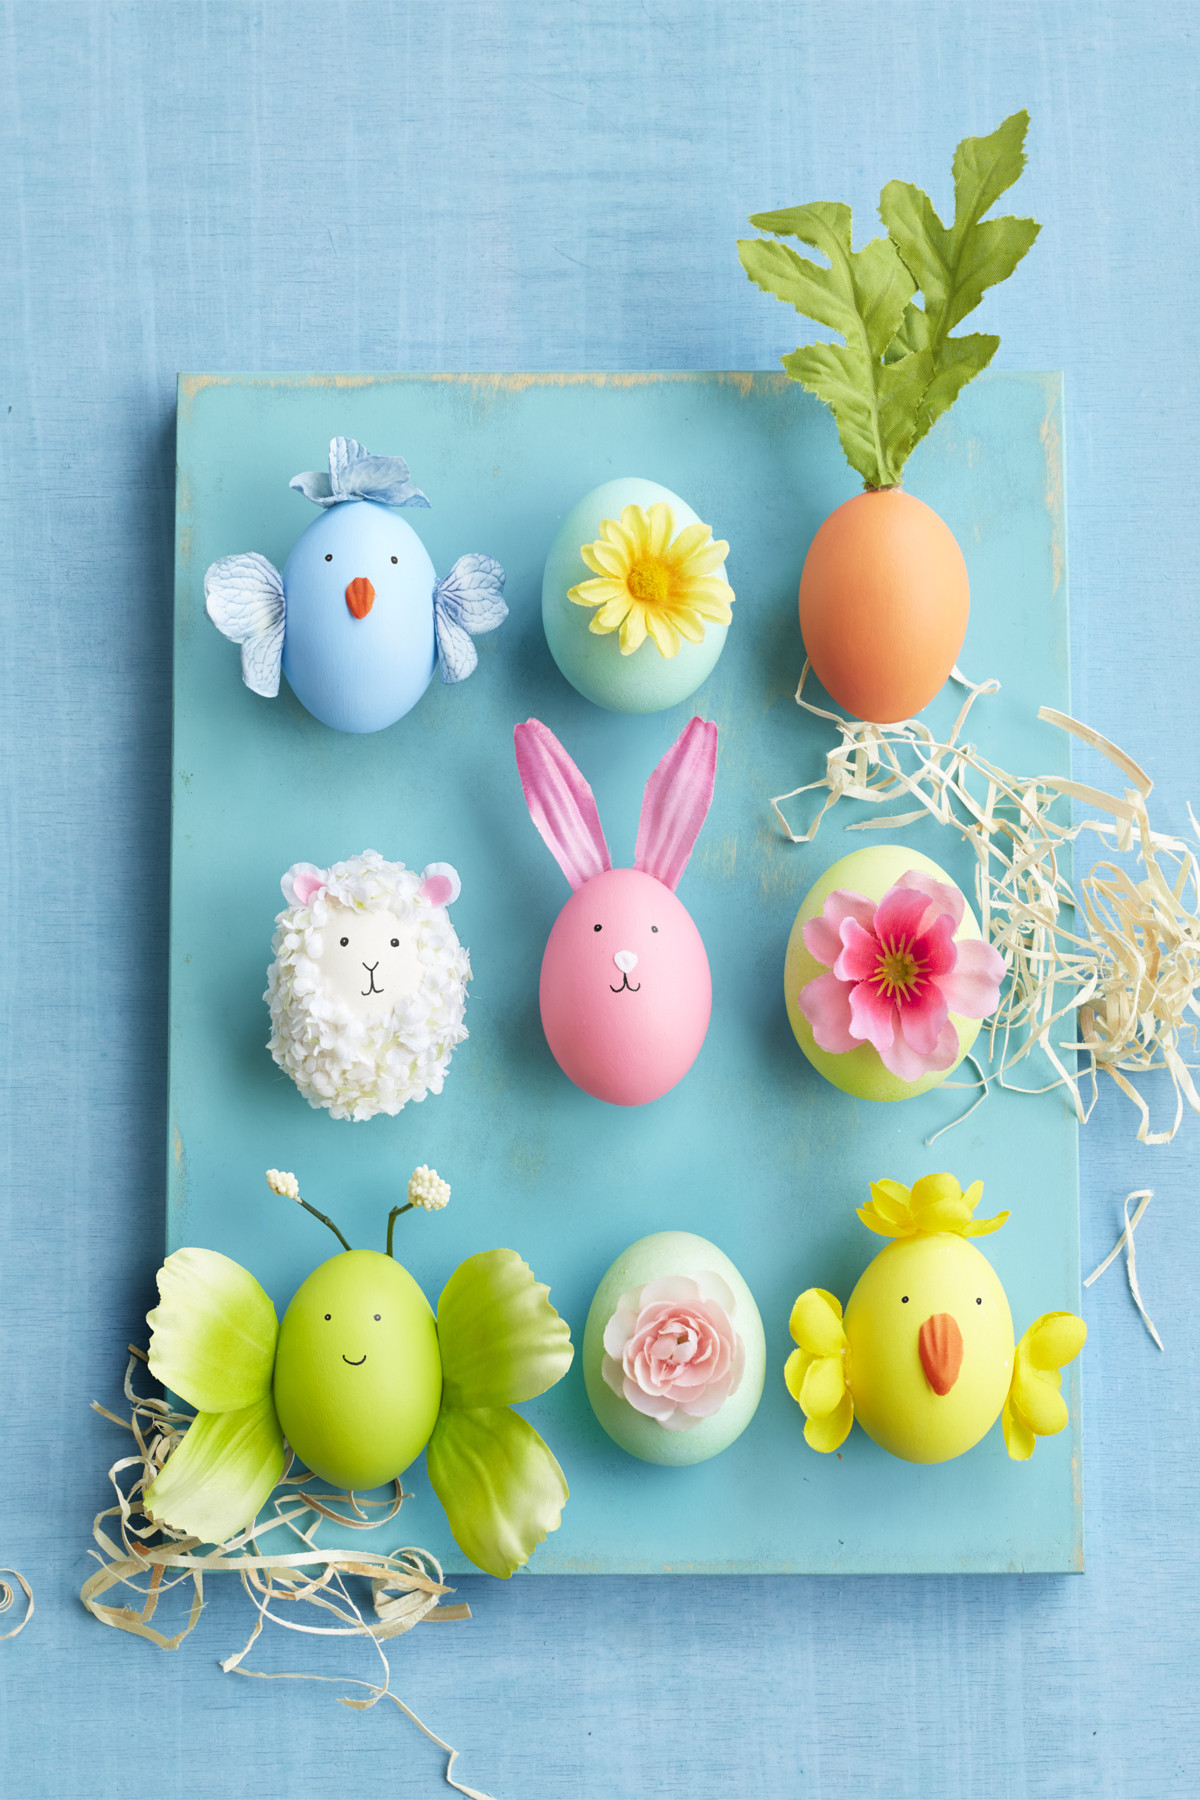 Ideas For Easter Eggs
 42 Cool Easter Egg Decorating Ideas Creative Designs for